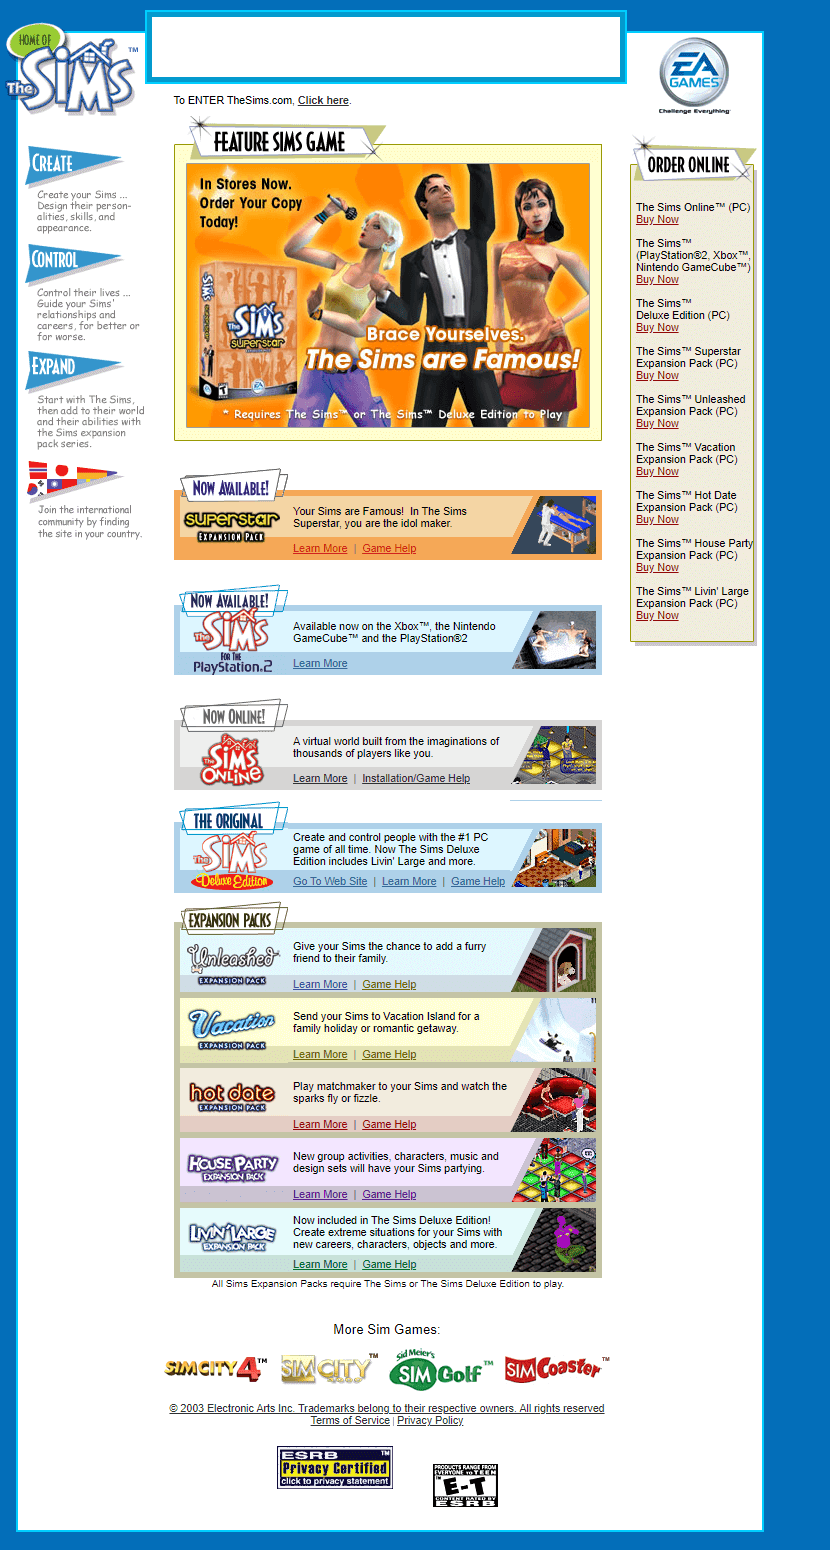 The Sims website in 2003